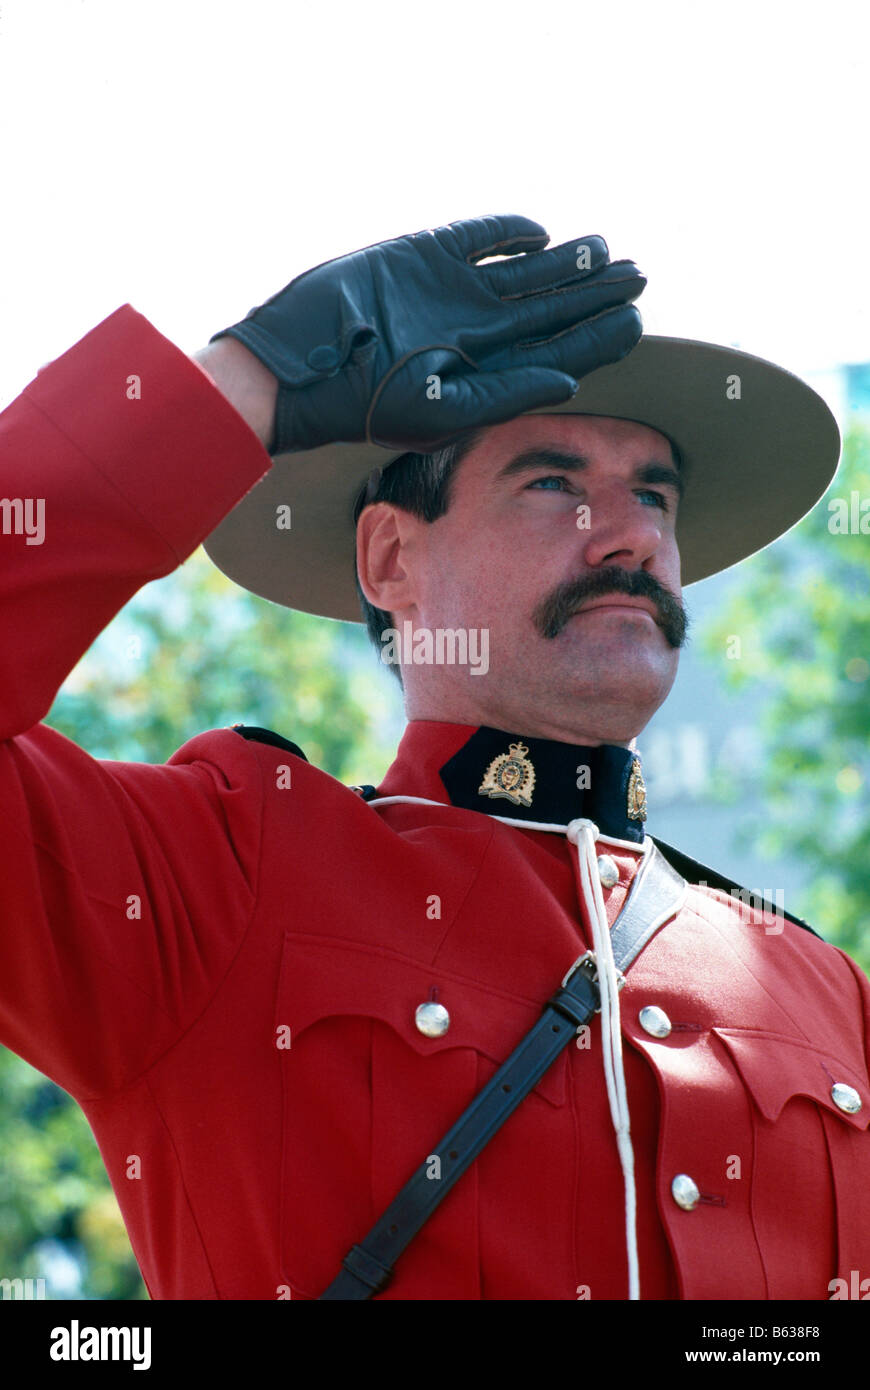 A Canadian Mountie (RCMP) Royal Canadian Mounted Police Officer saluting  and wearing Traditional Red Surge Uniform Stock Photo - Alamy